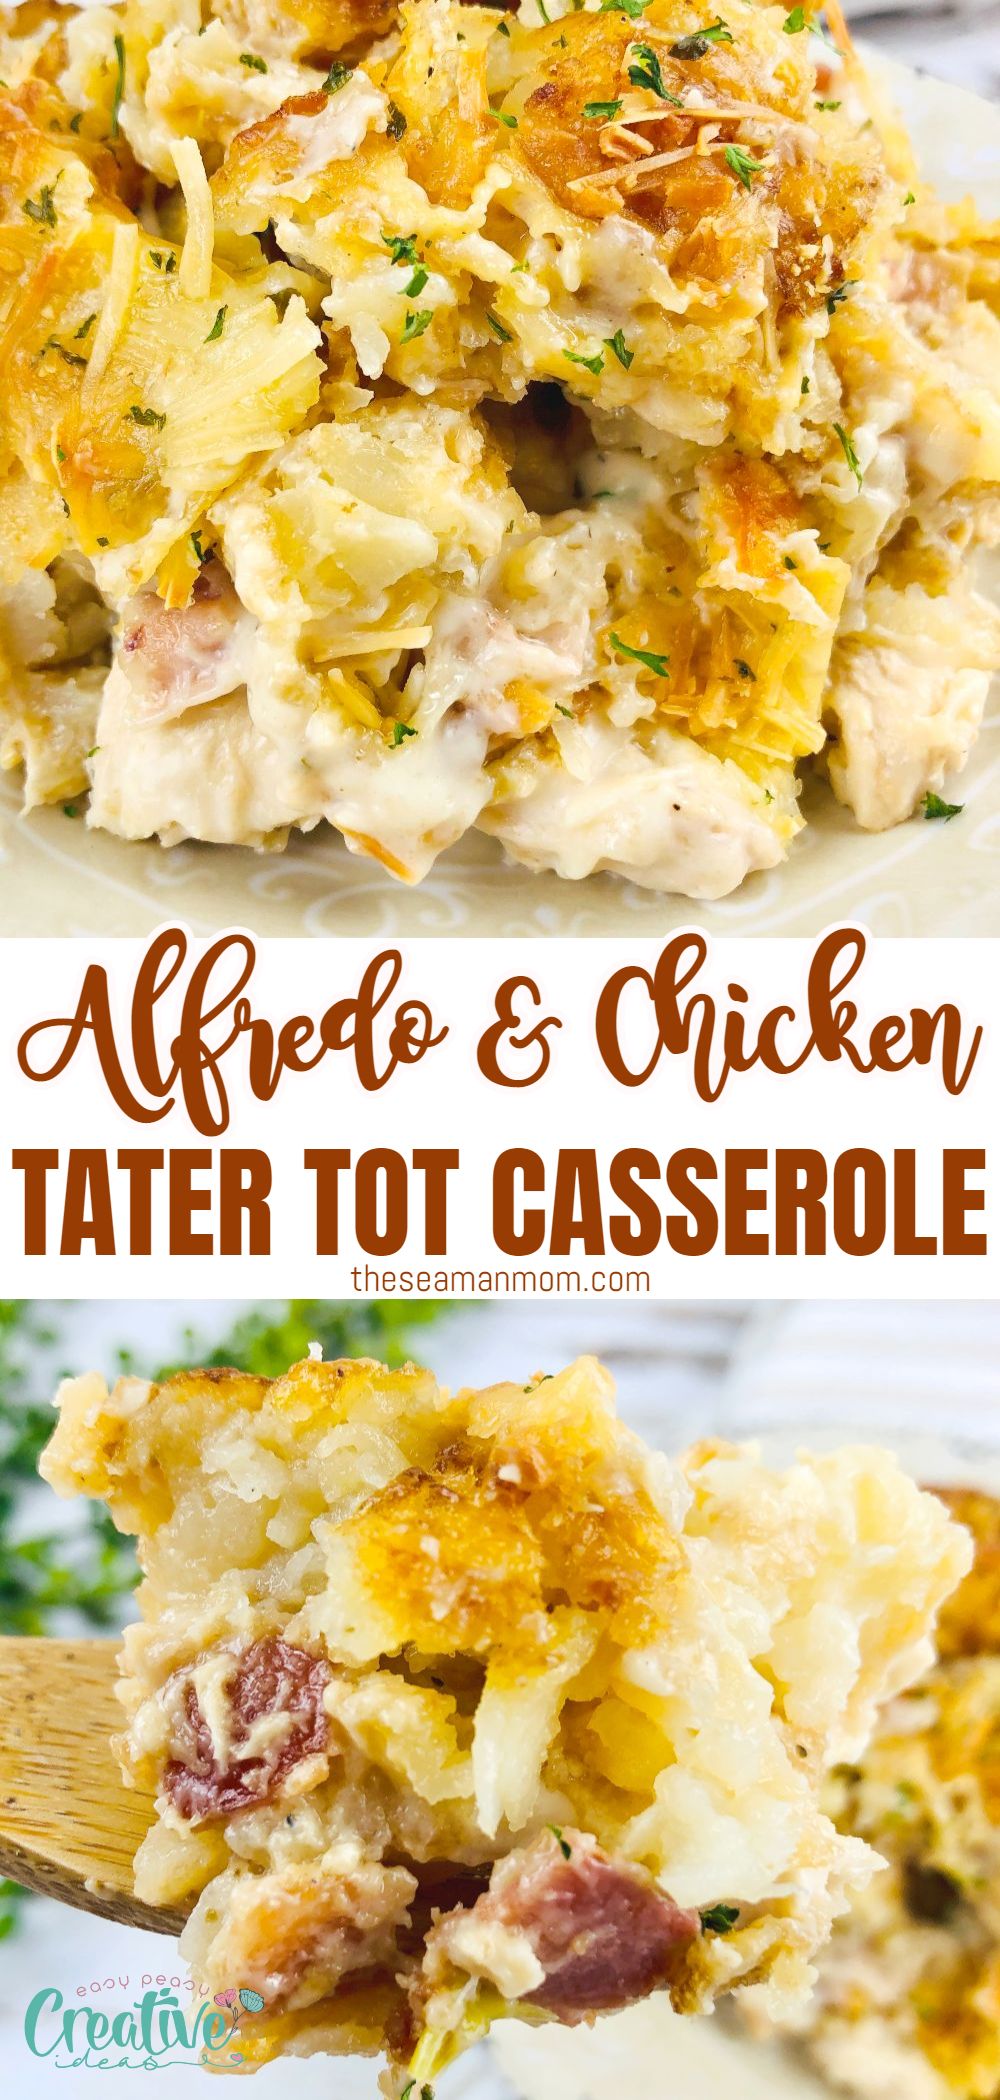 This easy cheesy CHICKEN TATER TOT CASSEROLE makes comfort food even more convenient! A delicious weeknight dinner that is loved by children and adults alike.  via @petroneagu